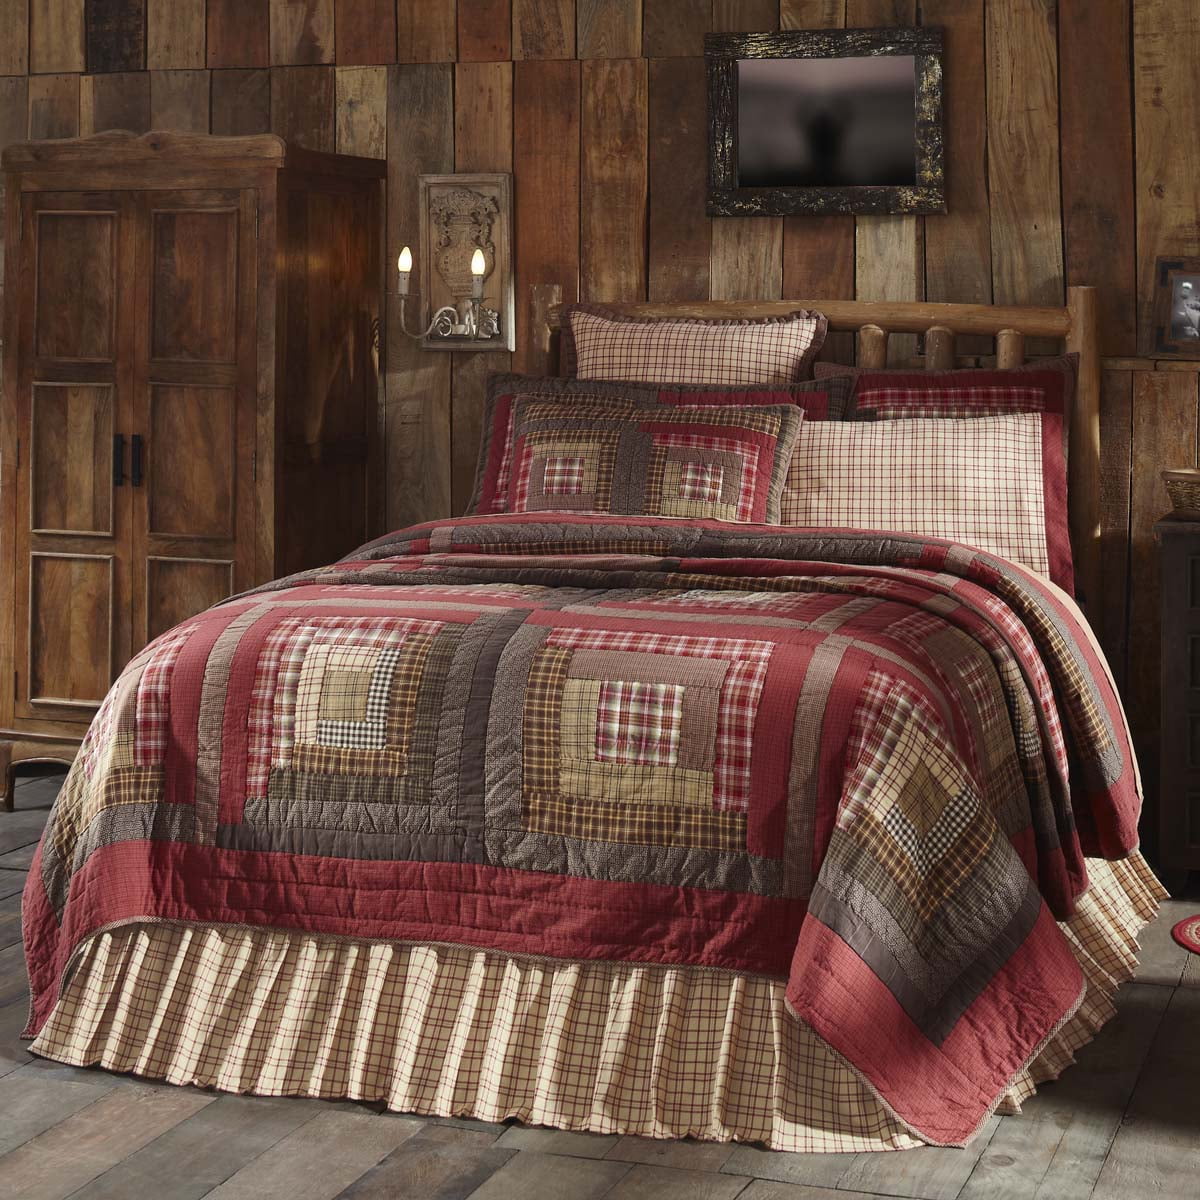 Details about   VHC Brands Rustic King Sham Red Patchwork Tacoma Cotton Hand Bedroom Decor 